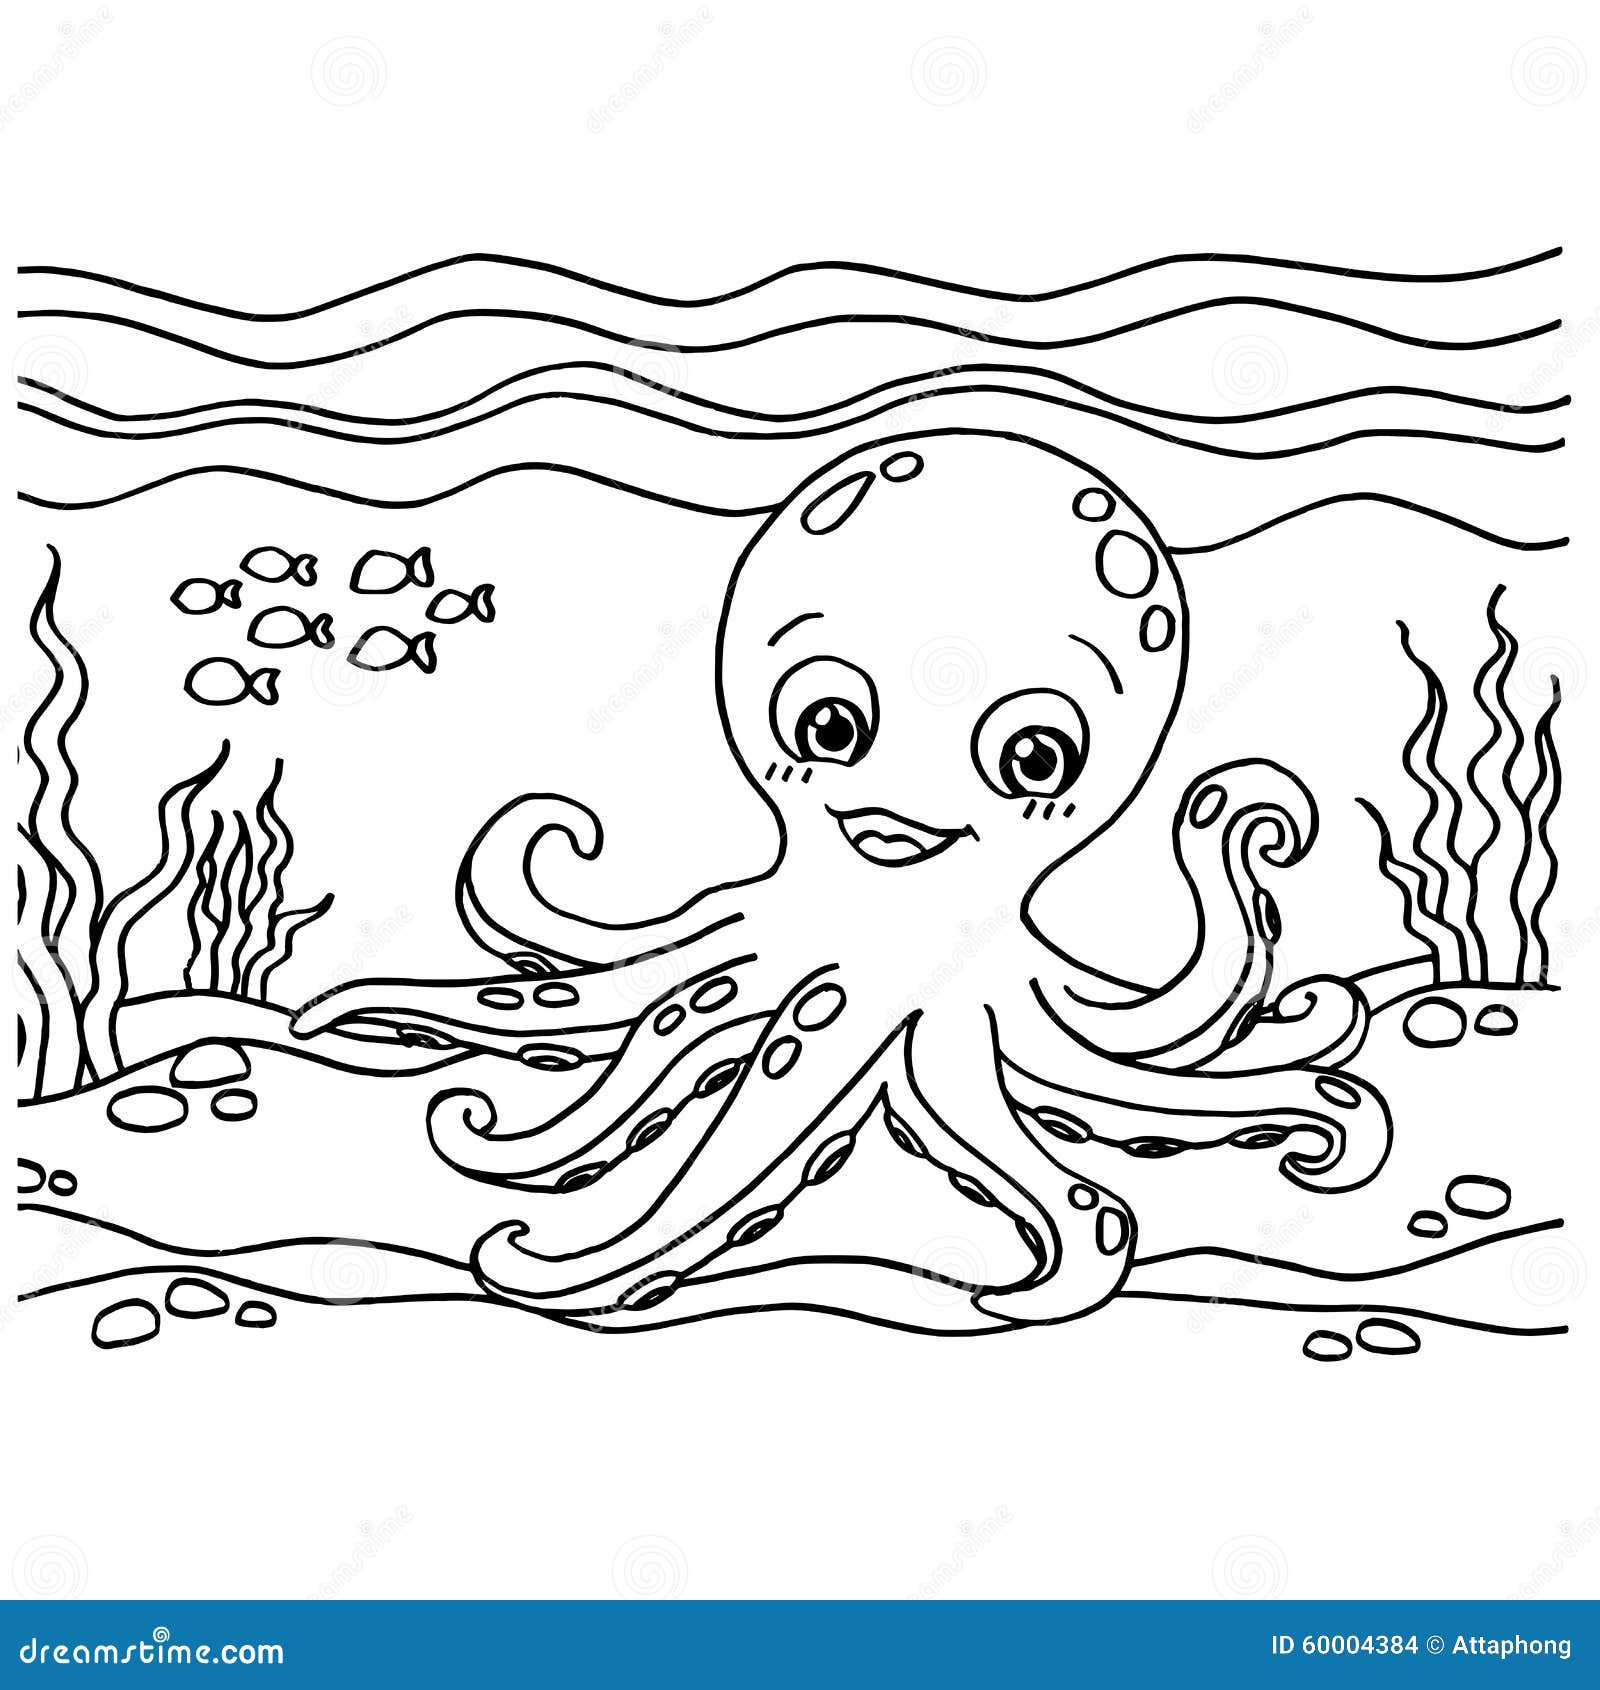 Octopus coloring pages vector stock vector